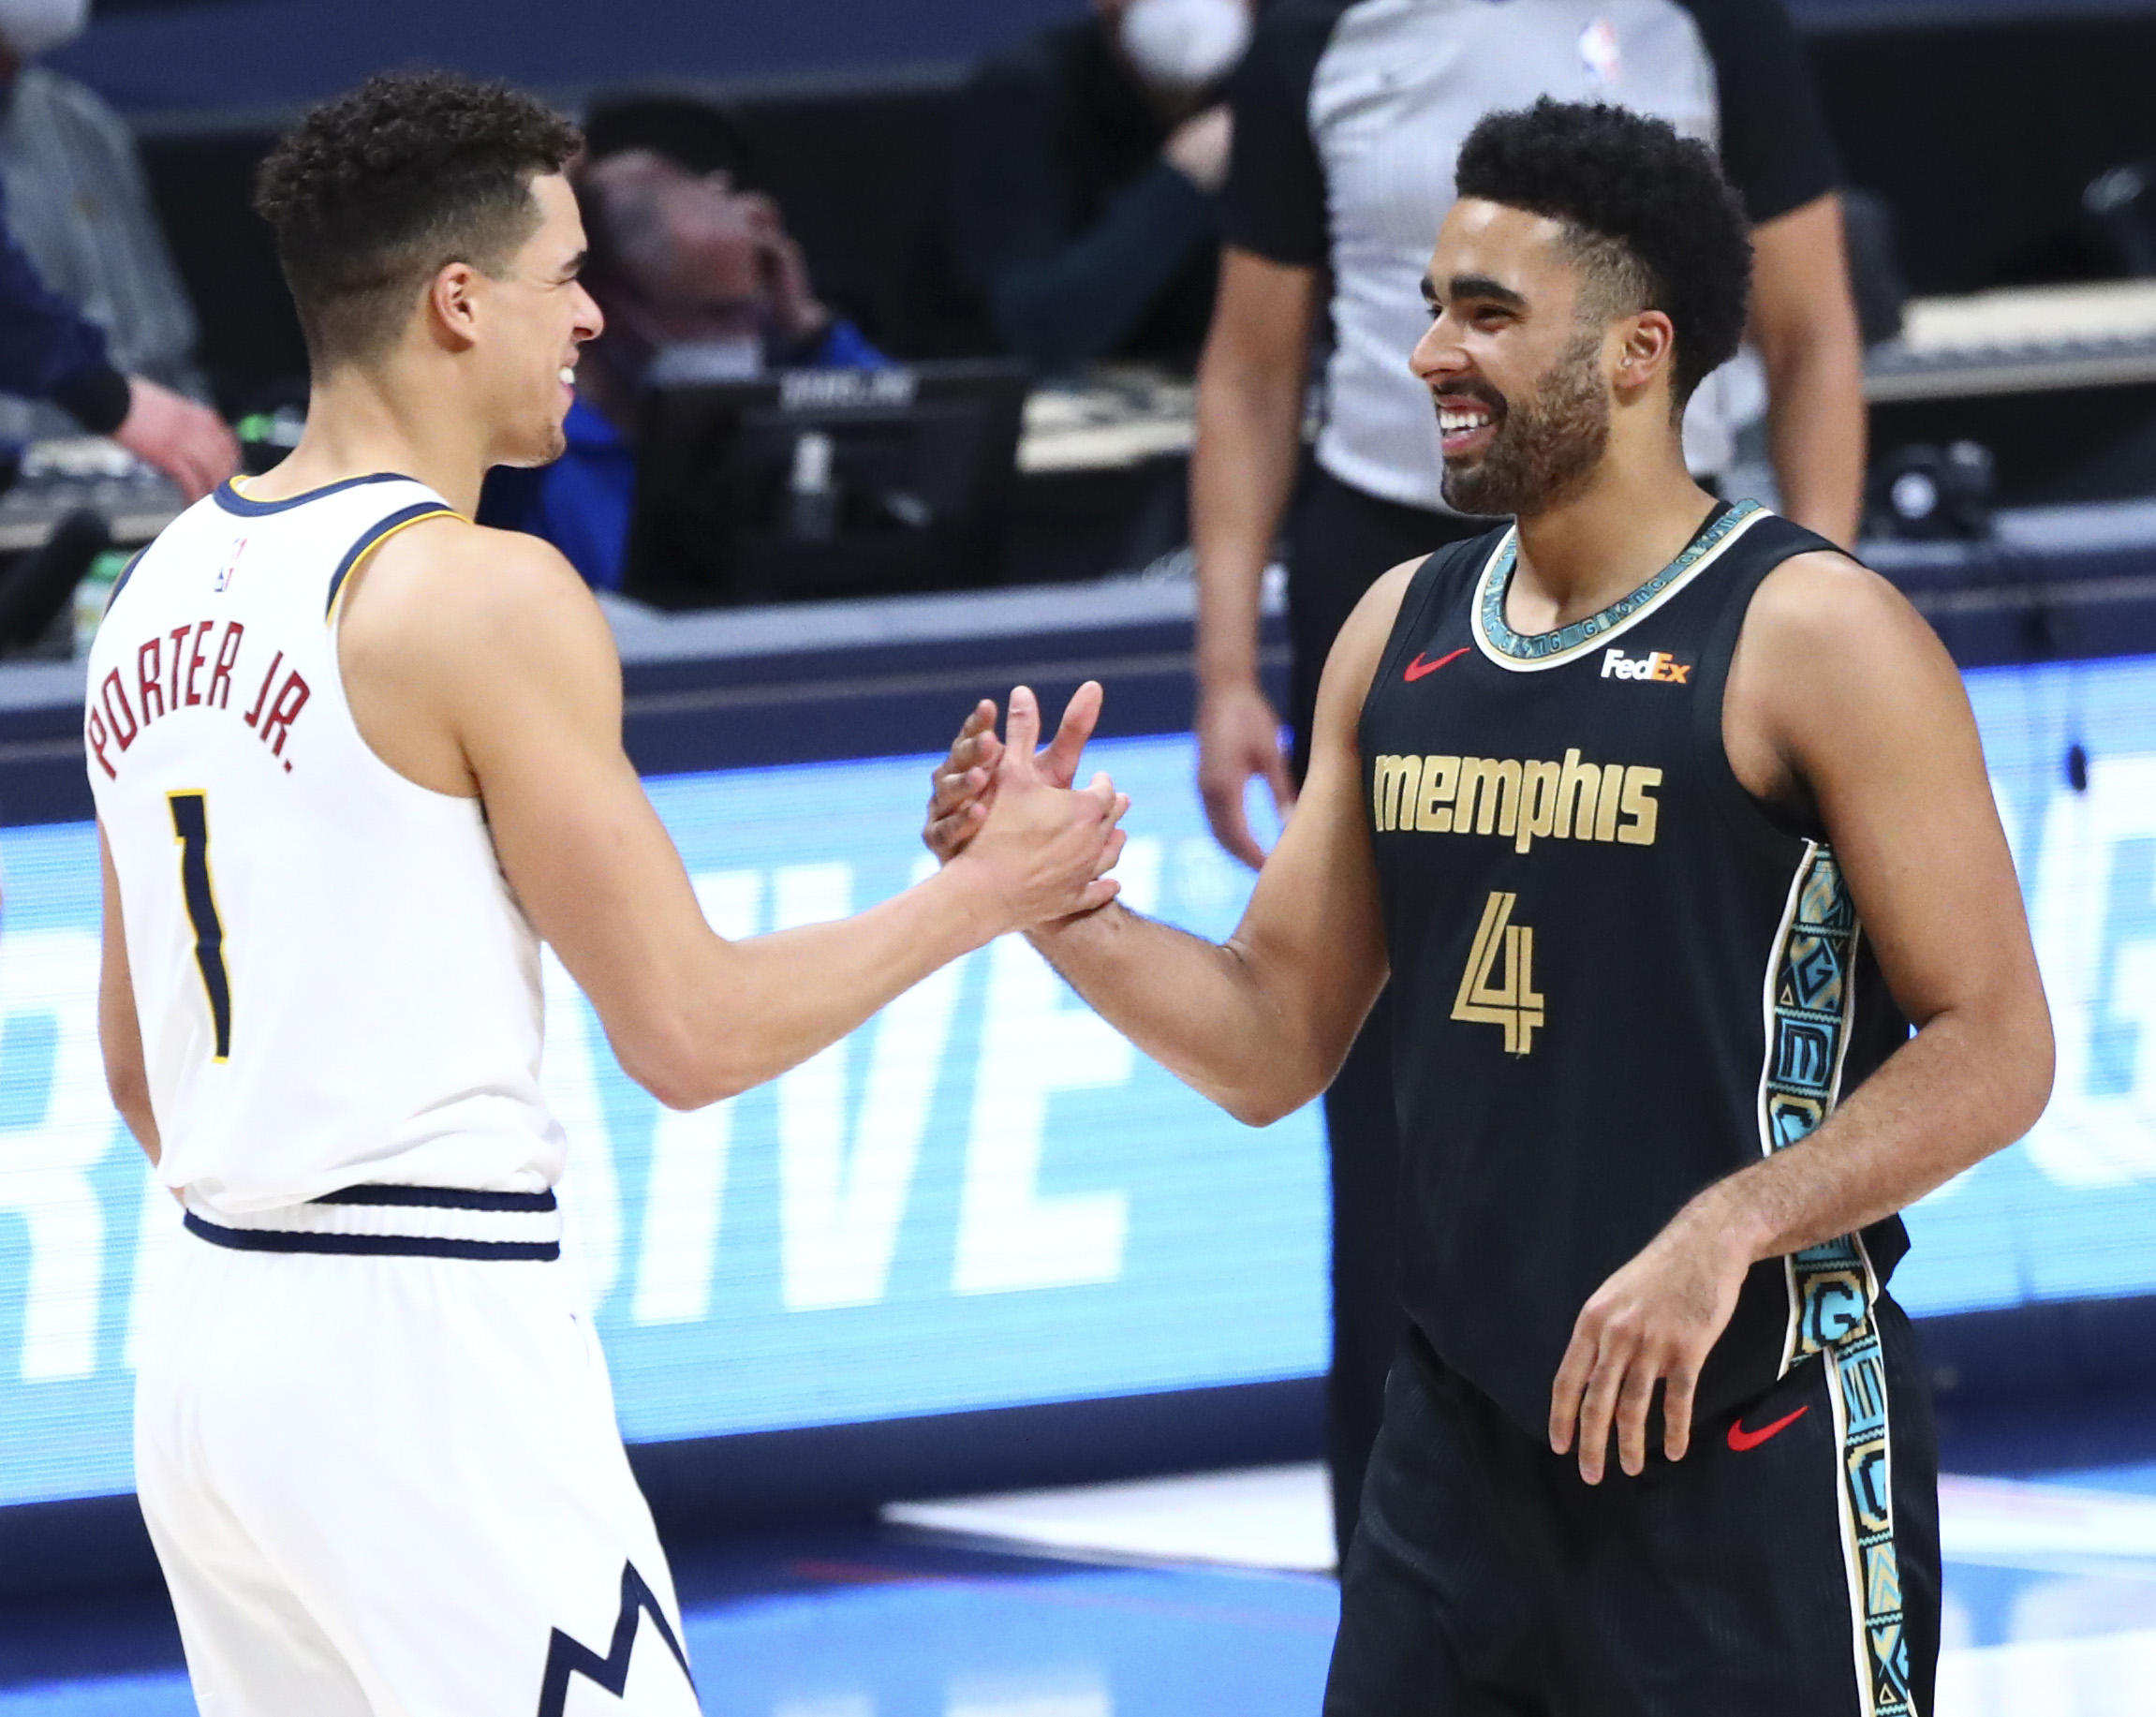 Michael Porter Jr. of the Denver Nuggets and Jontay Porter of the Memphis Grizzlies shake hands after the game at Ball Arena on April 26, 2021.